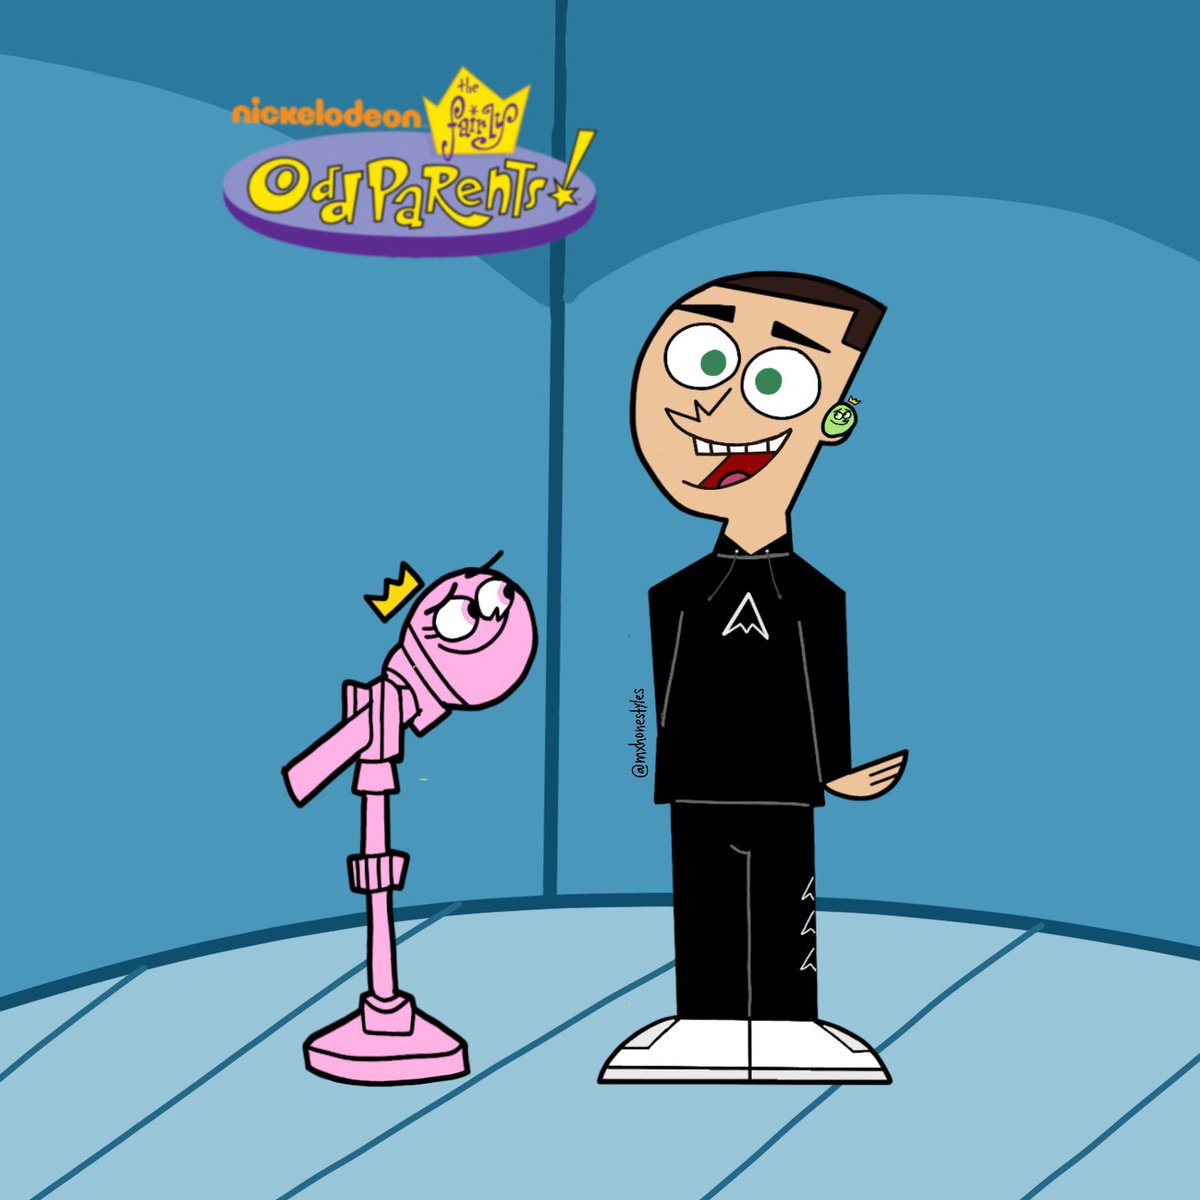 2. The Fairly Oddparents